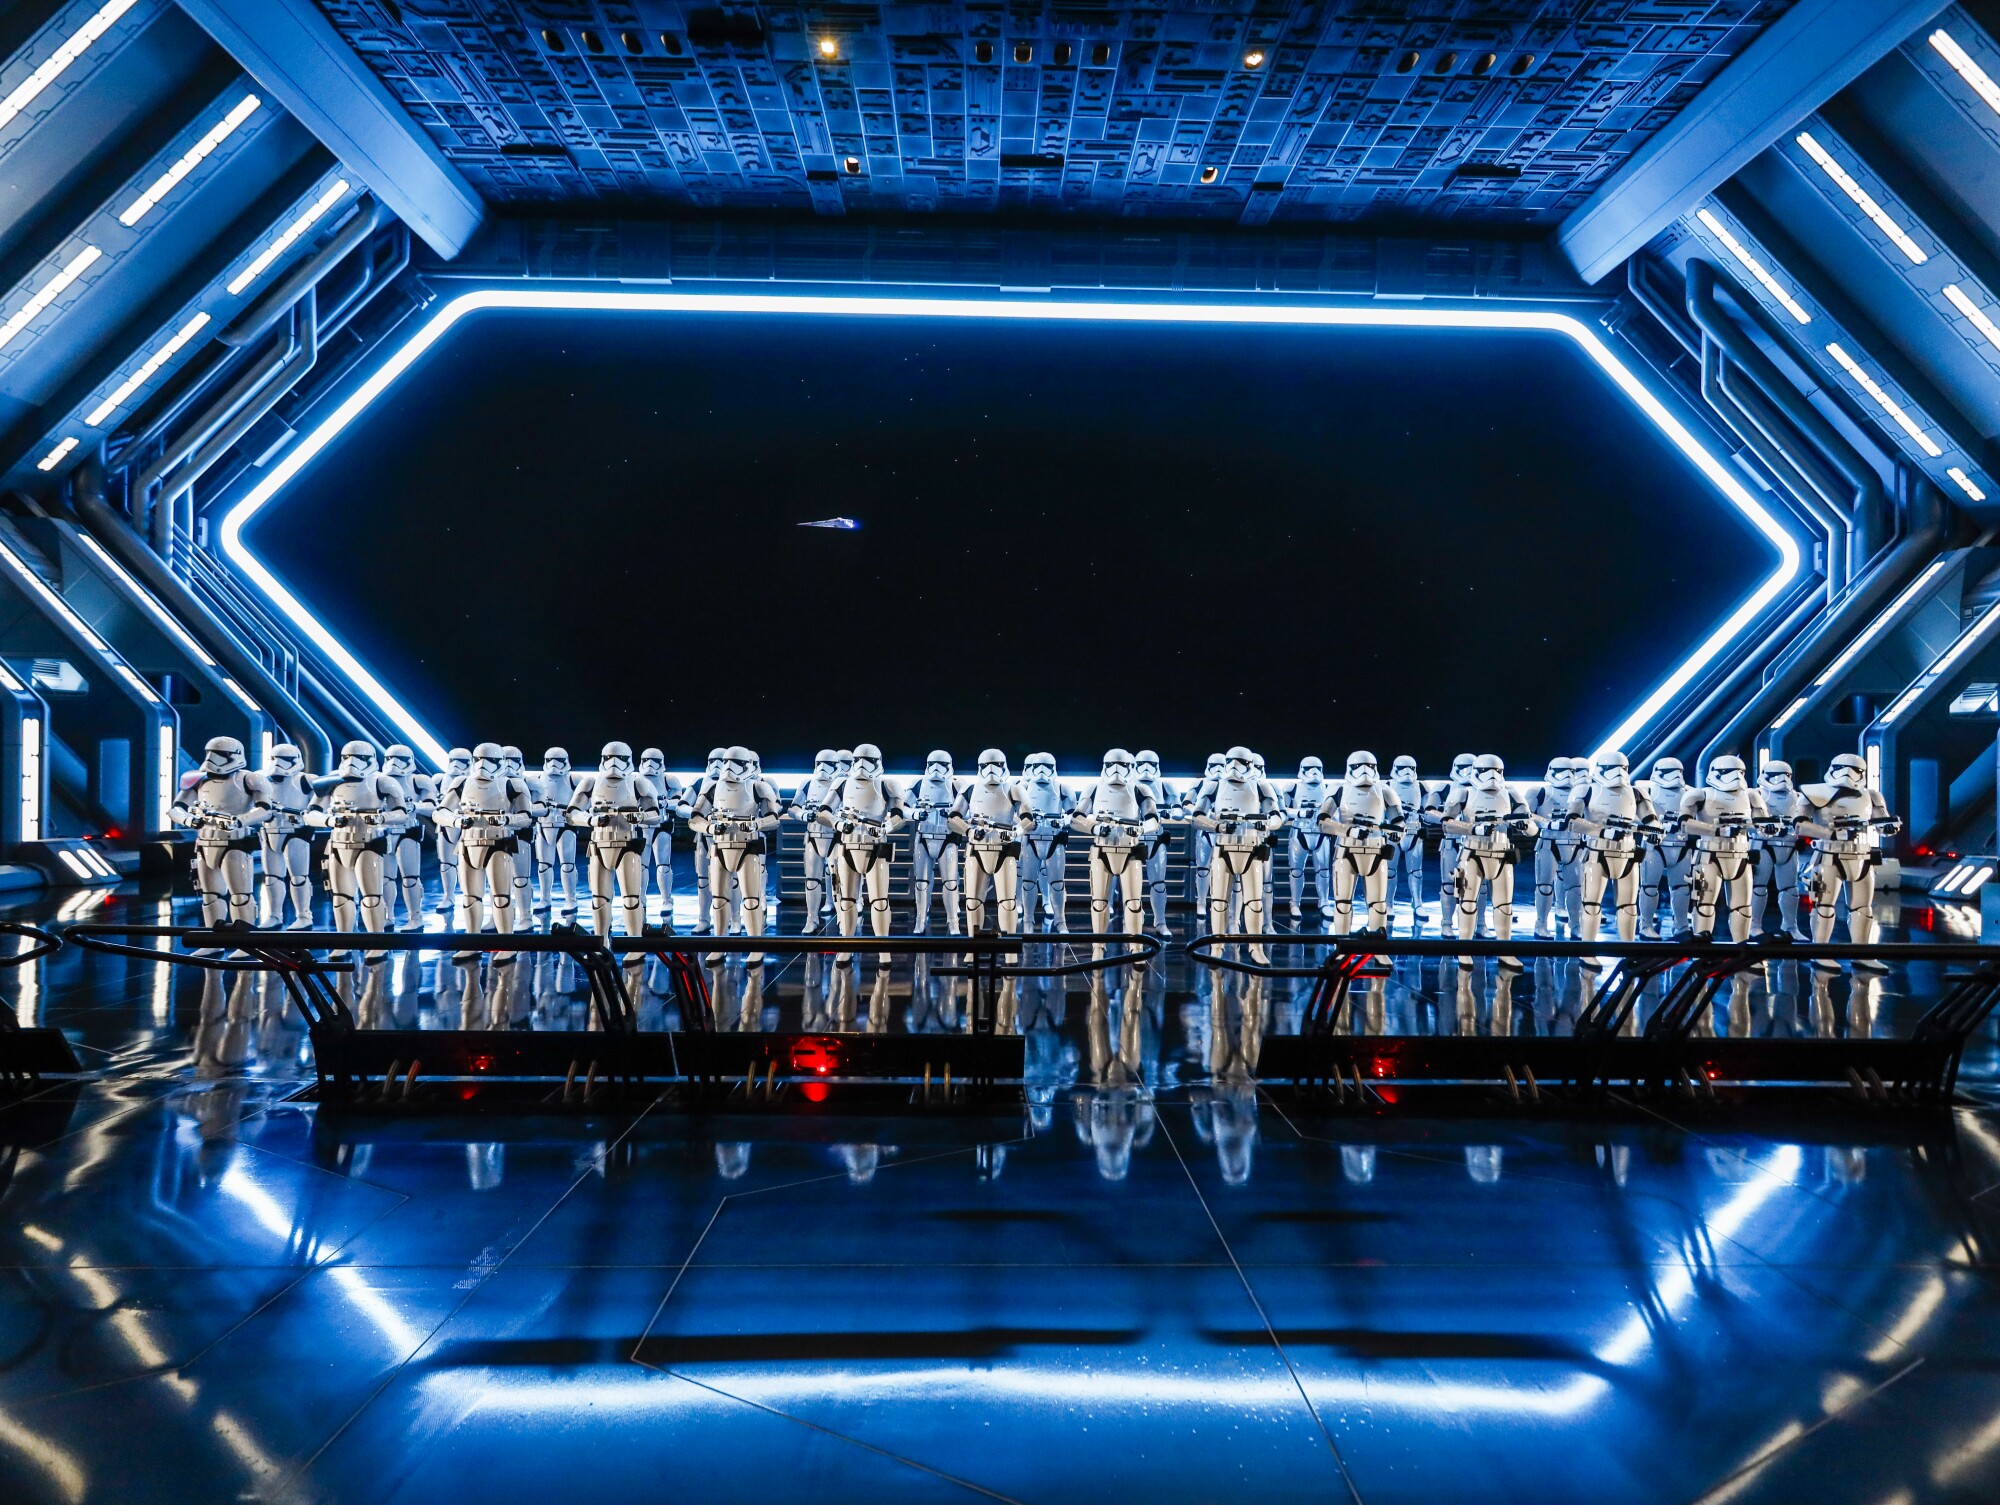 Stormtroopers stand at attention as part of Disney World's Star Wars: Rise of the Resistance attraction.